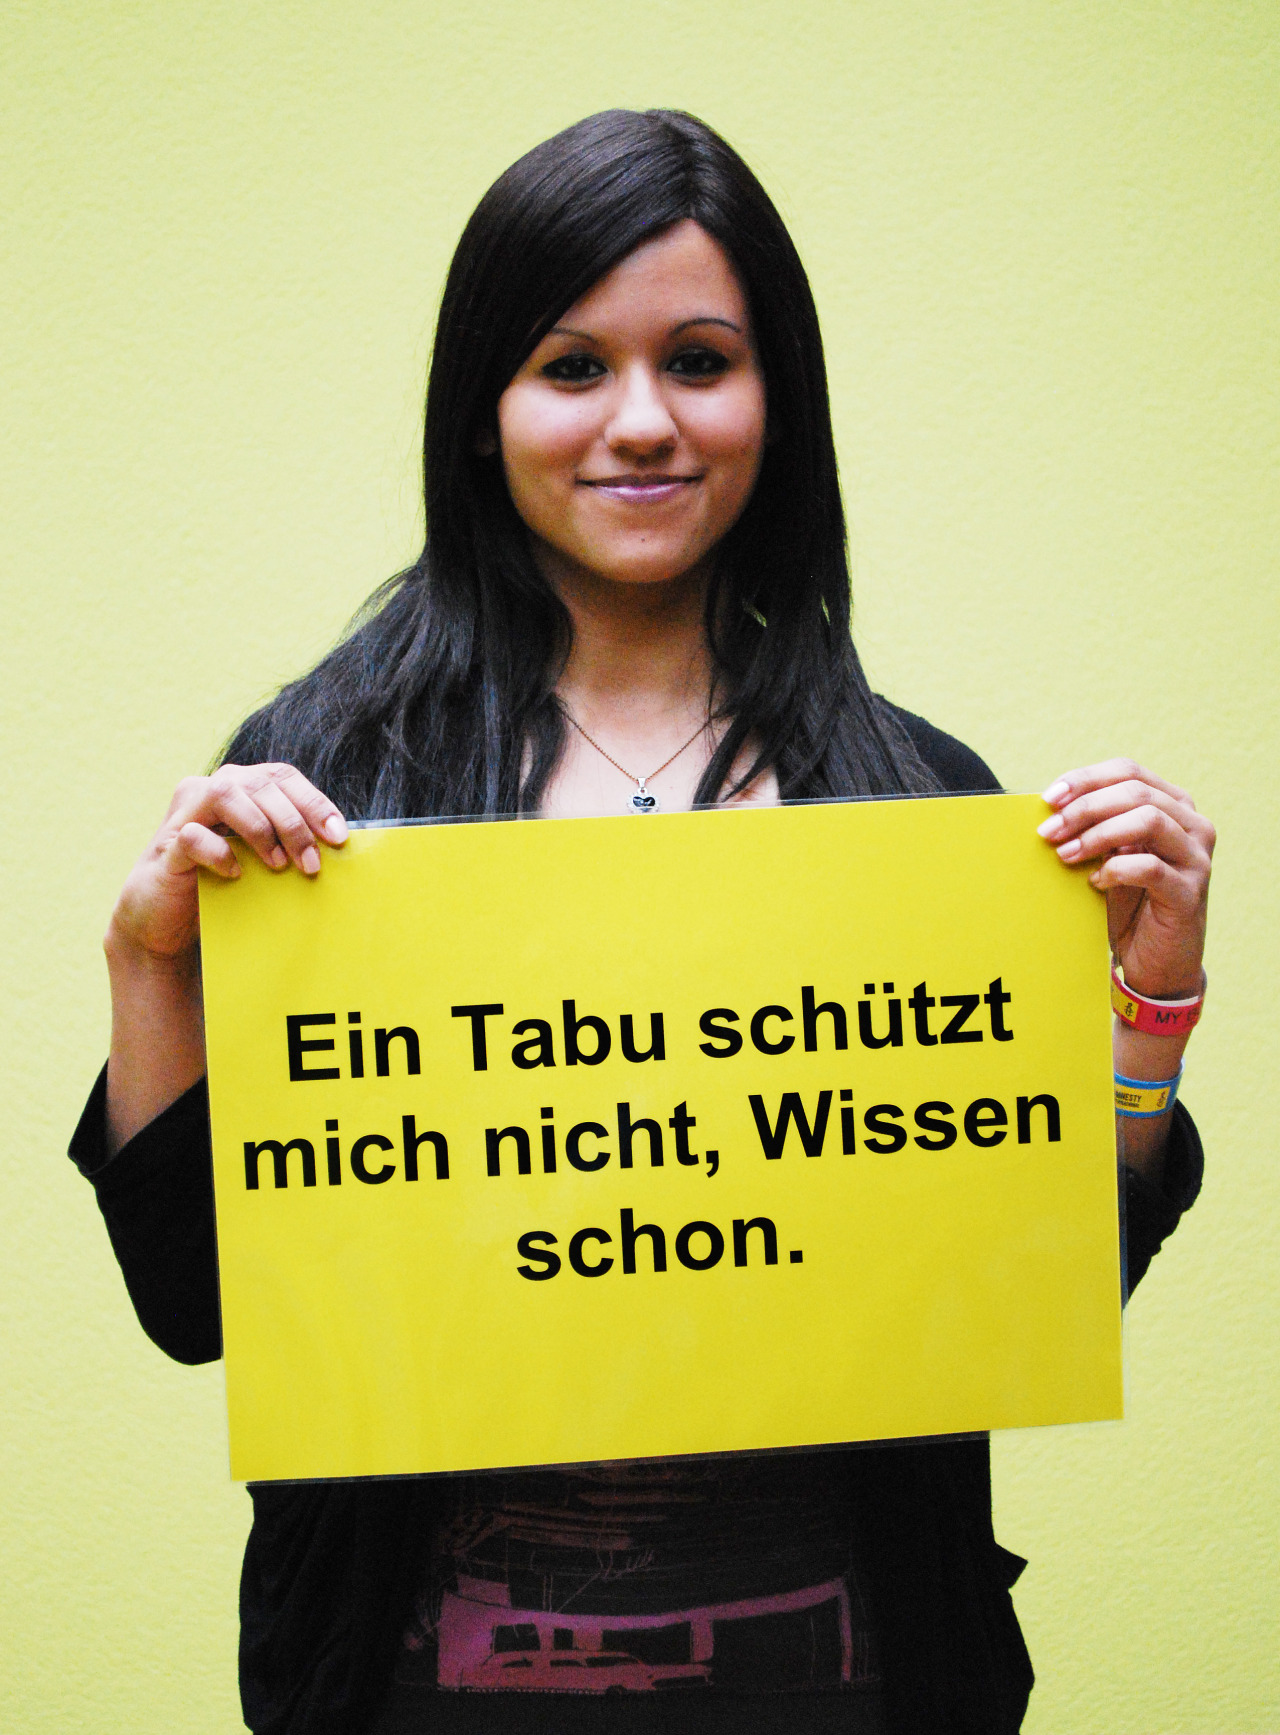 "A tabu doesn&#8217;t protect me. Knowledge does" Amnesty Switzerland, Bern